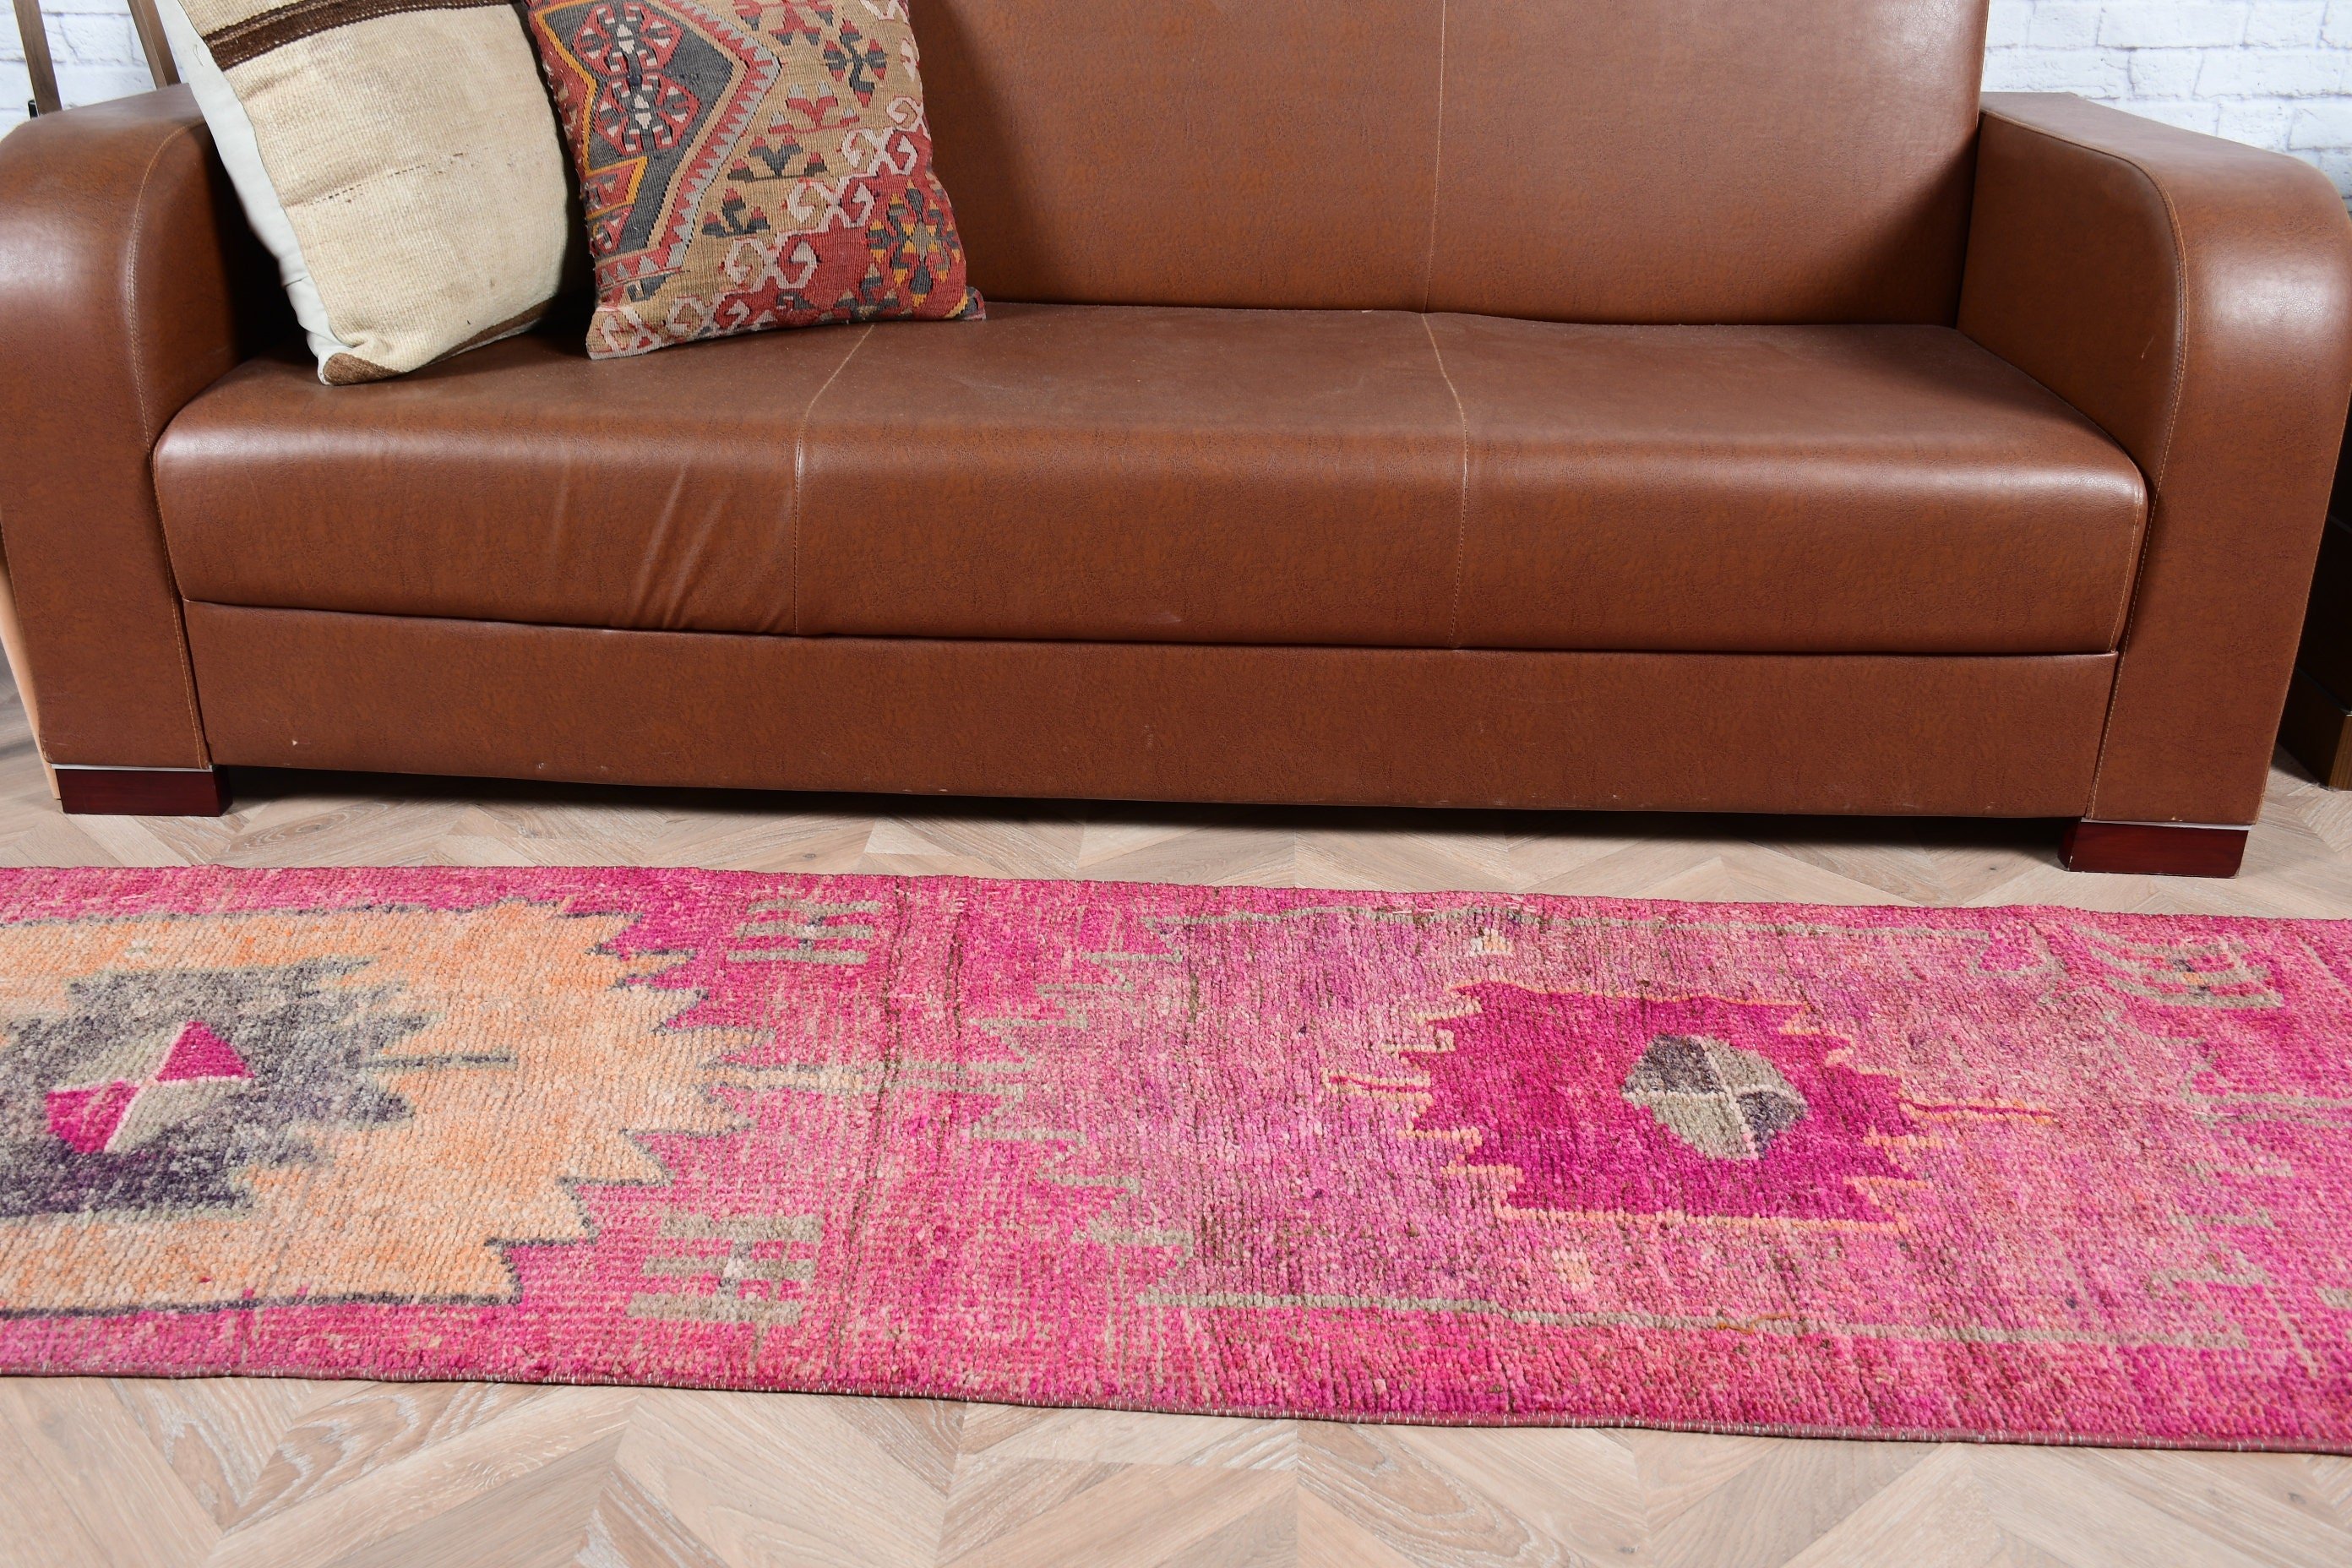 Vintage Rug, Hand Knotted Rug, Stair Rug, 2.2x10.8 ft Runner Rugs, Cool Rugs, Pink Moroccan Rug, Rugs for Kitchen, Wool Rug, Turkish Rug